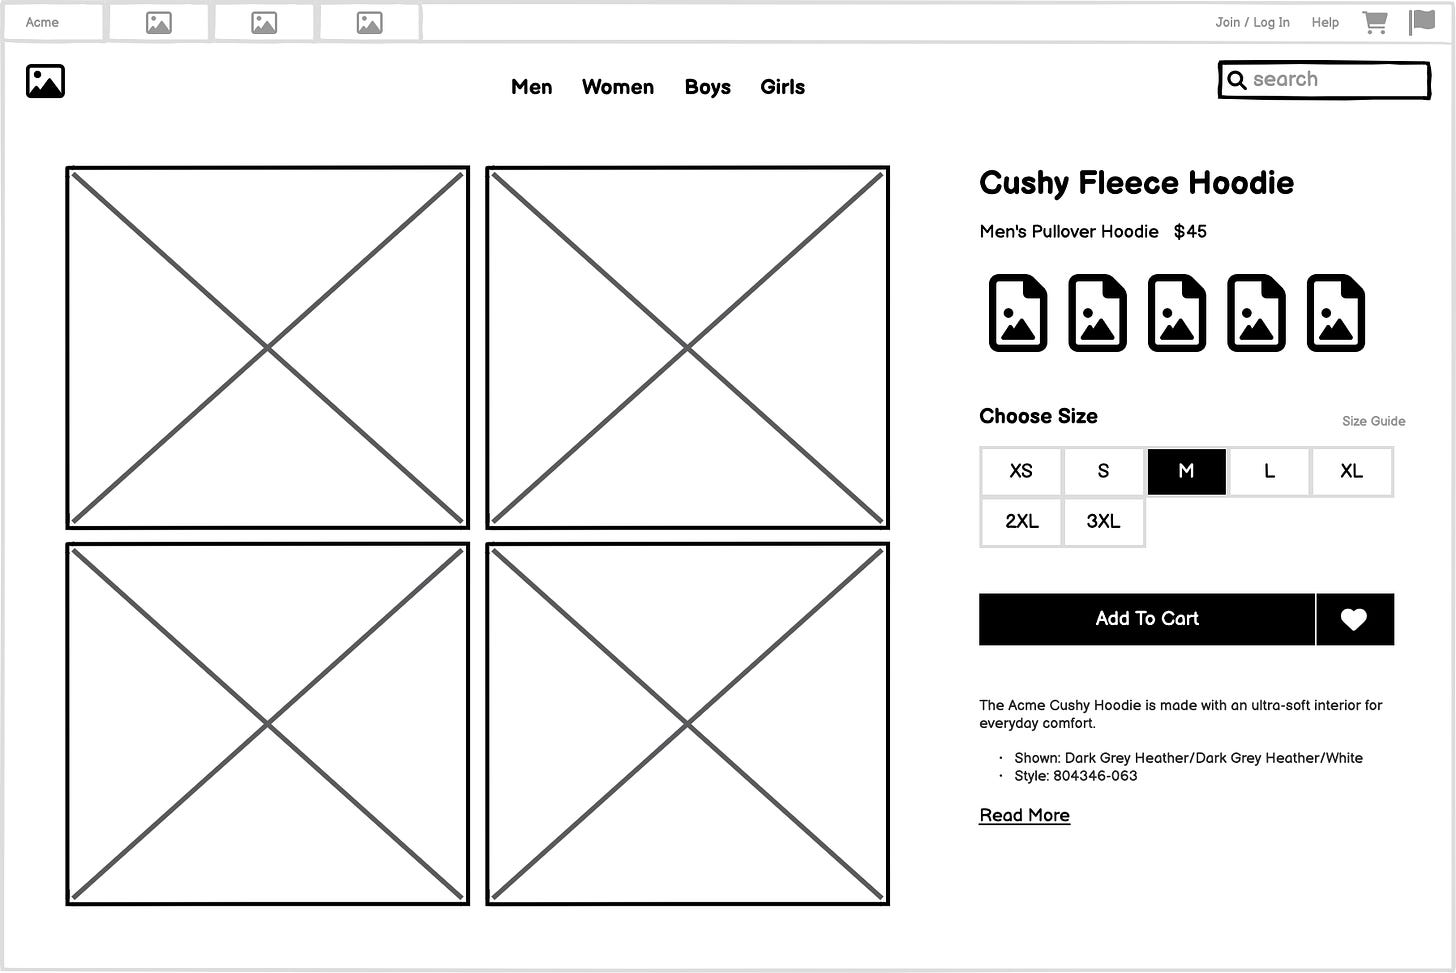 Balsamiq wireframe of a product detail web page.